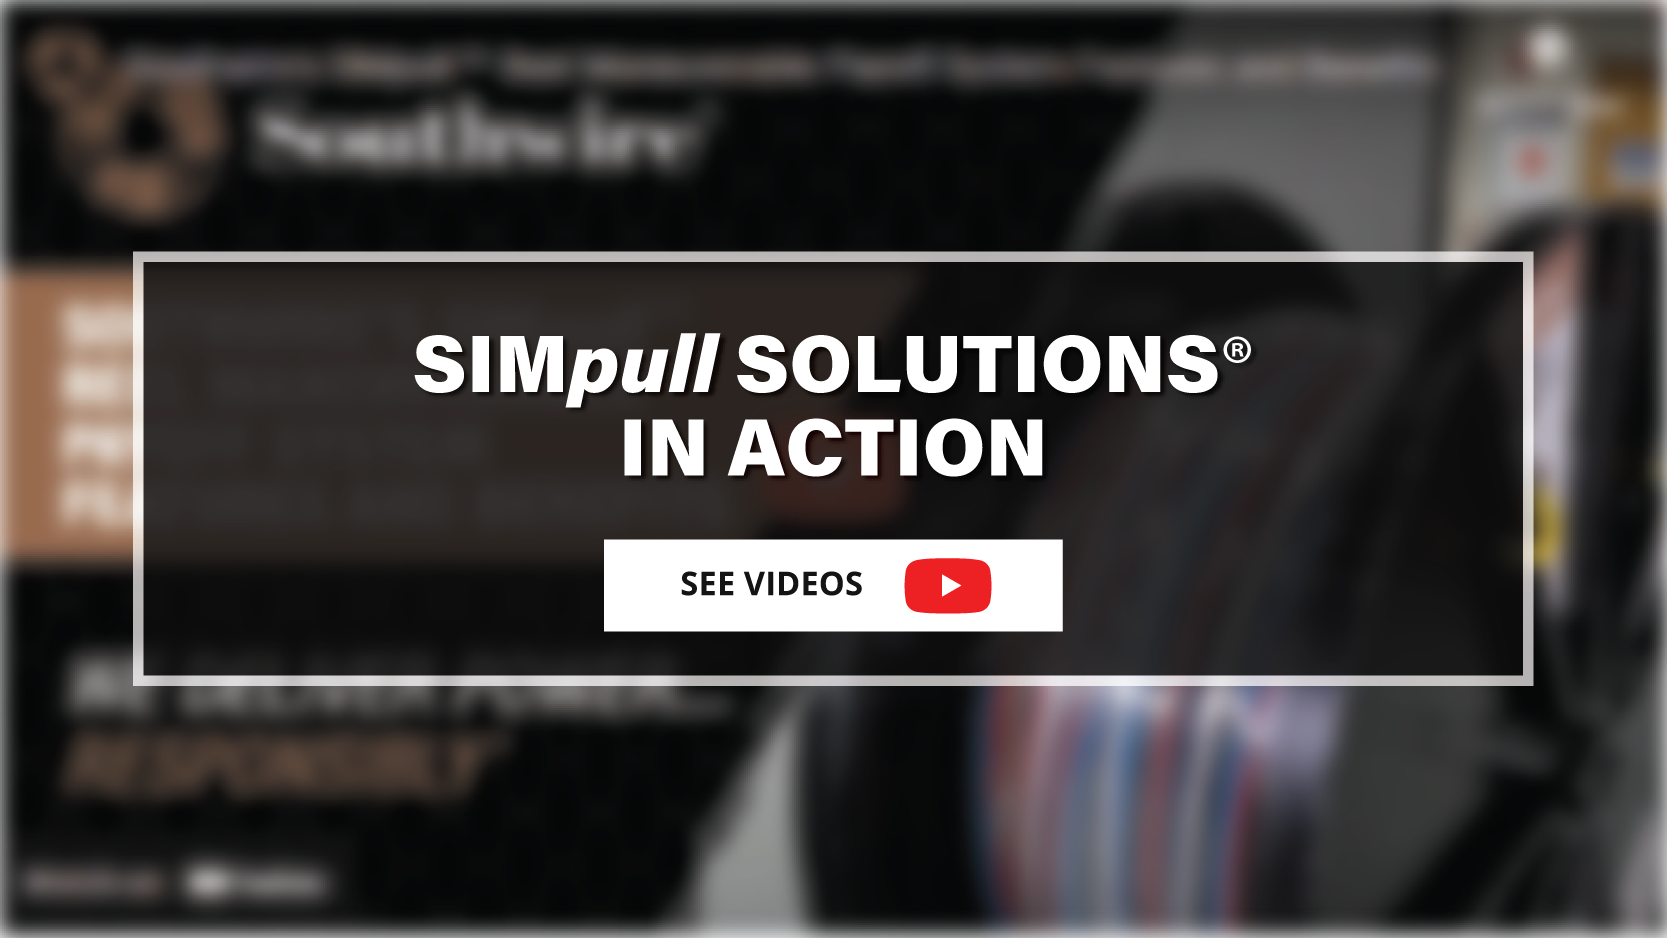 Texcan - Services - Paralleling & SIMpull Solutions® - Videos